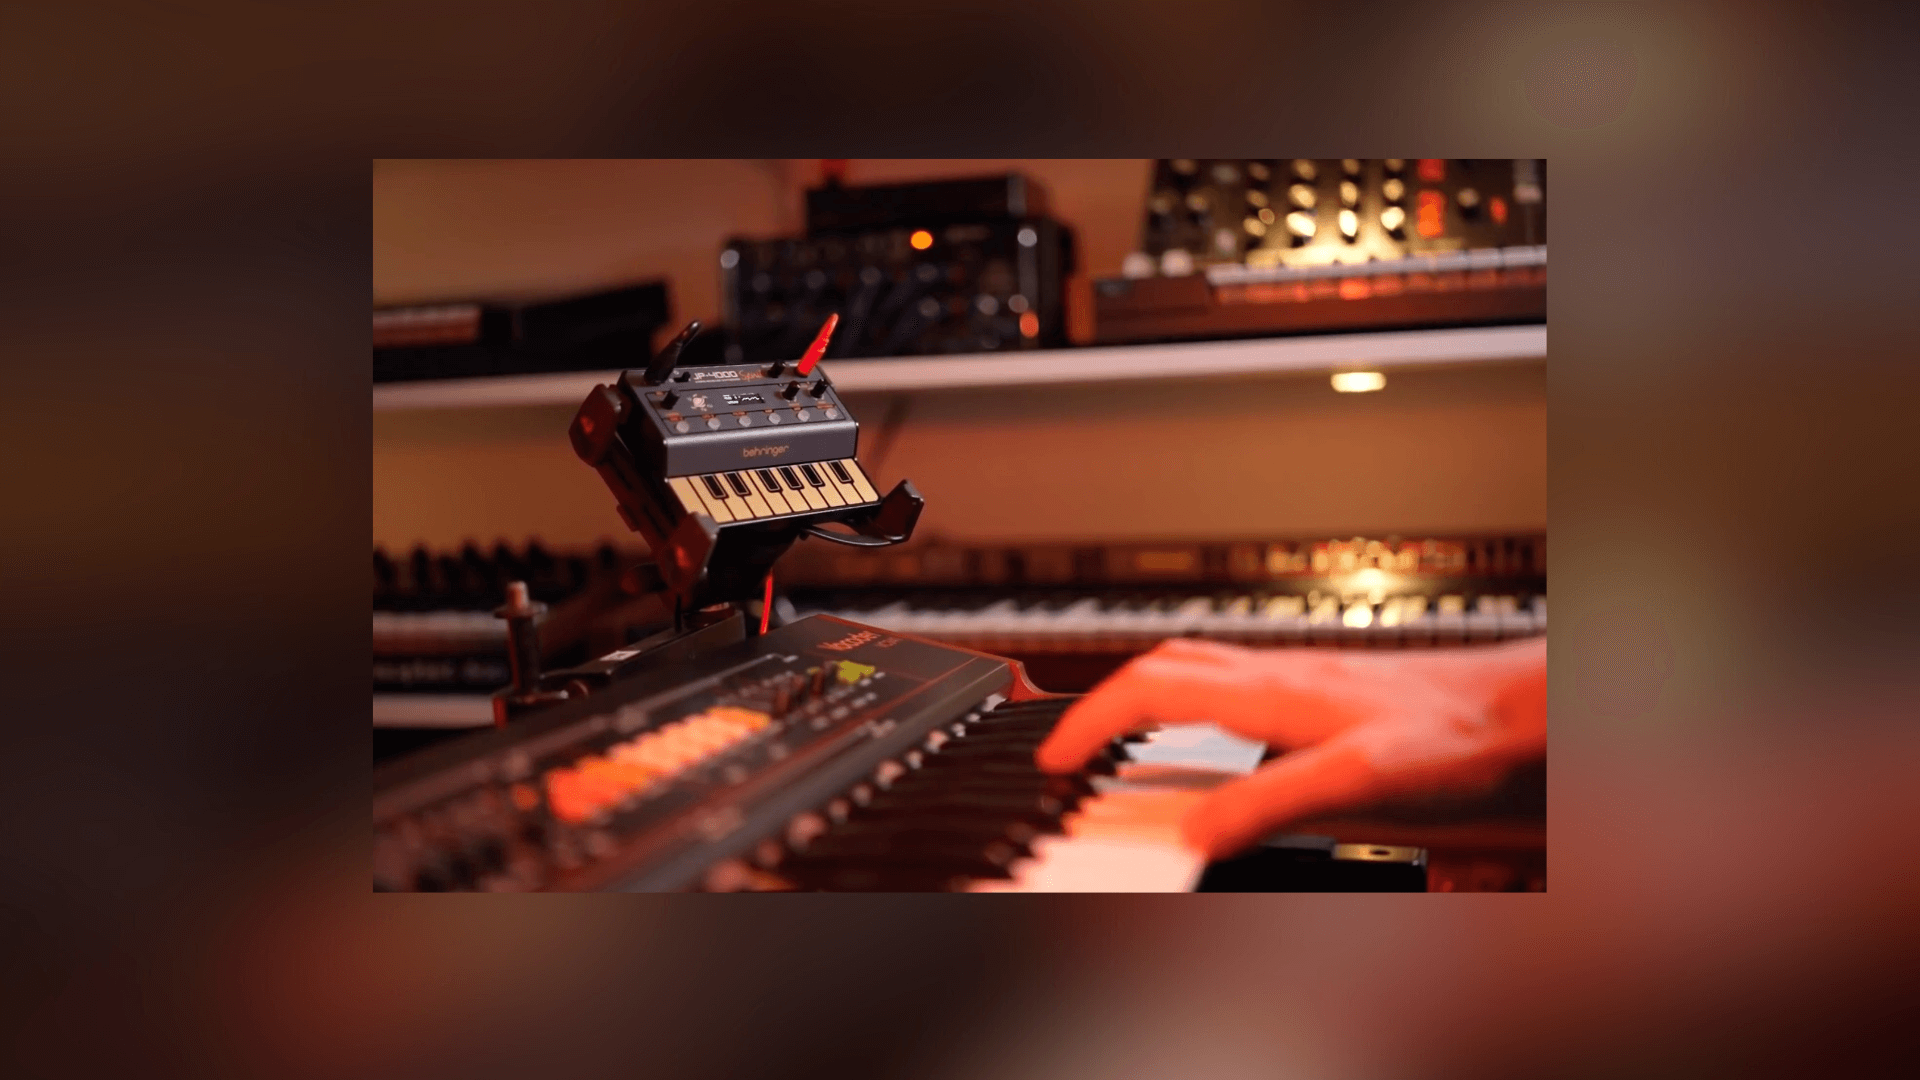 The new Behringer TJ-4000 synthesizer will soon be available